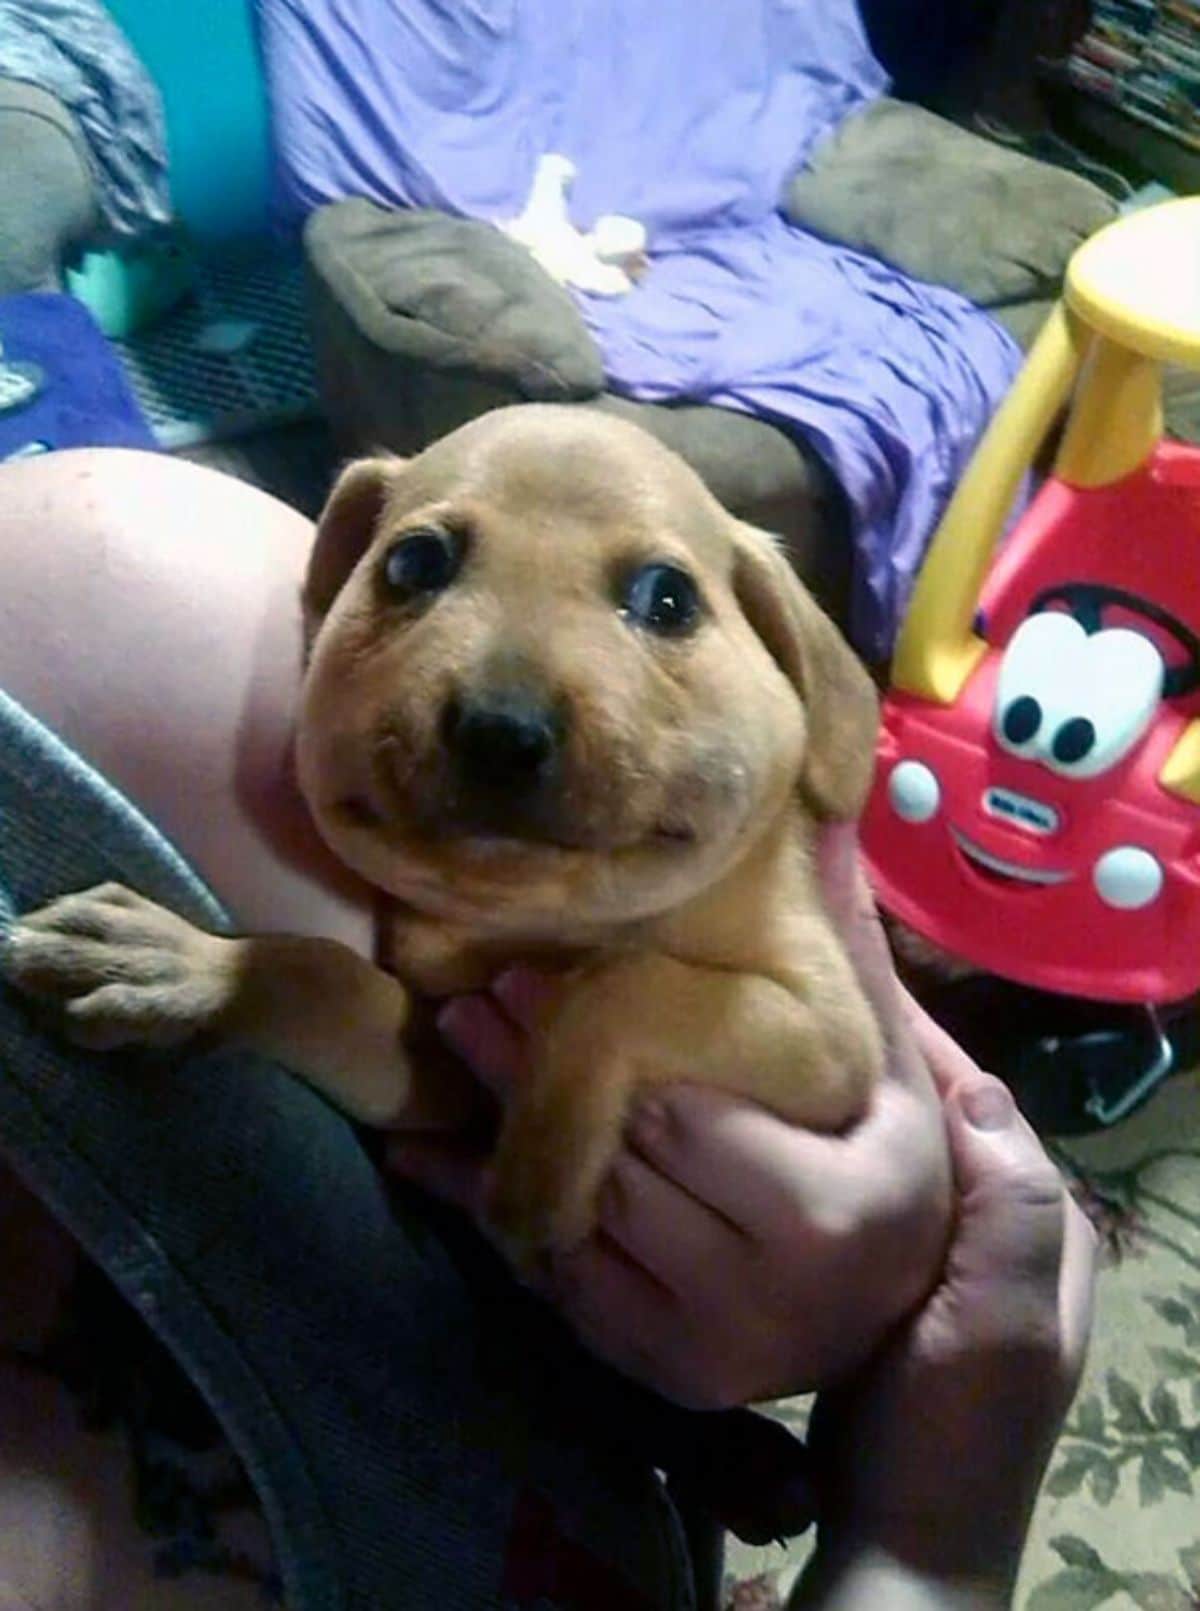 brown puppy held by someone and the puppy's mouth is swollen